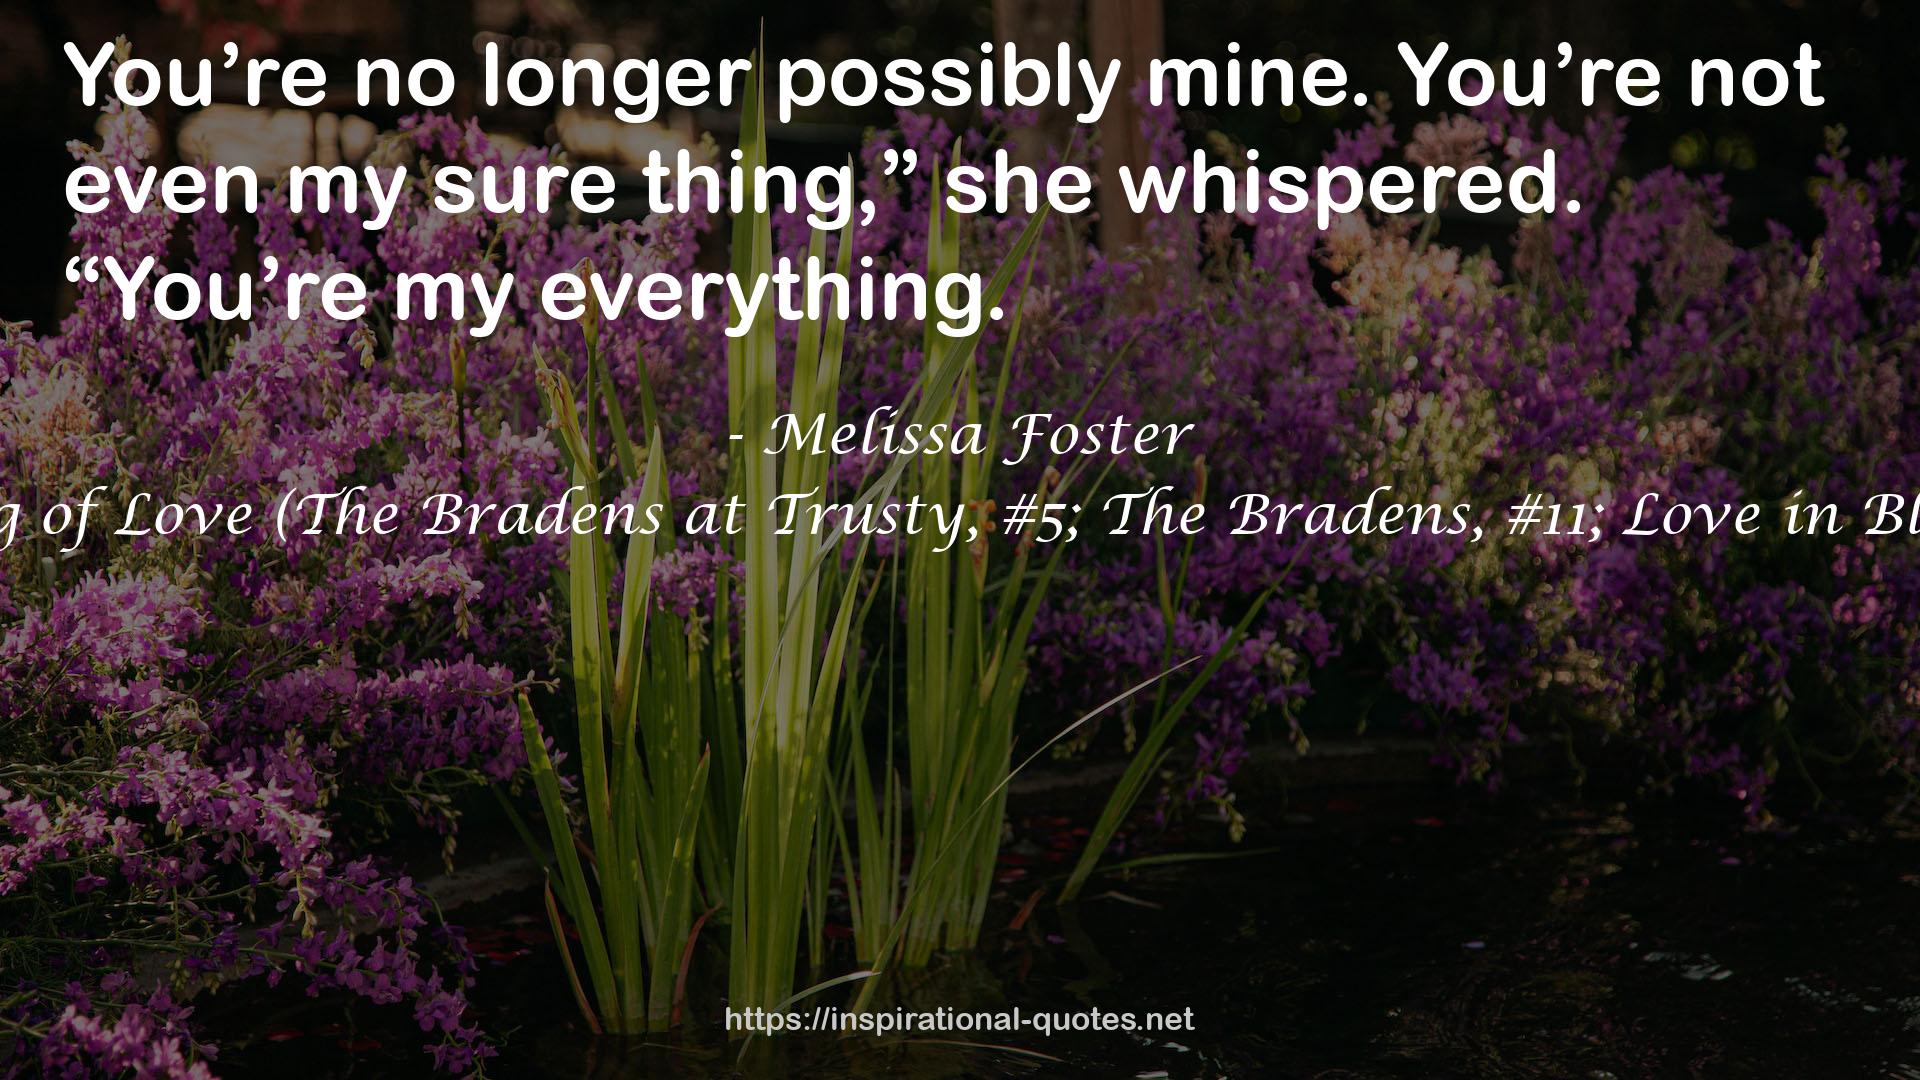 Dreaming of Love (The Bradens at Trusty, #5; The Bradens, #11; Love in Bloom, #20) QUOTES